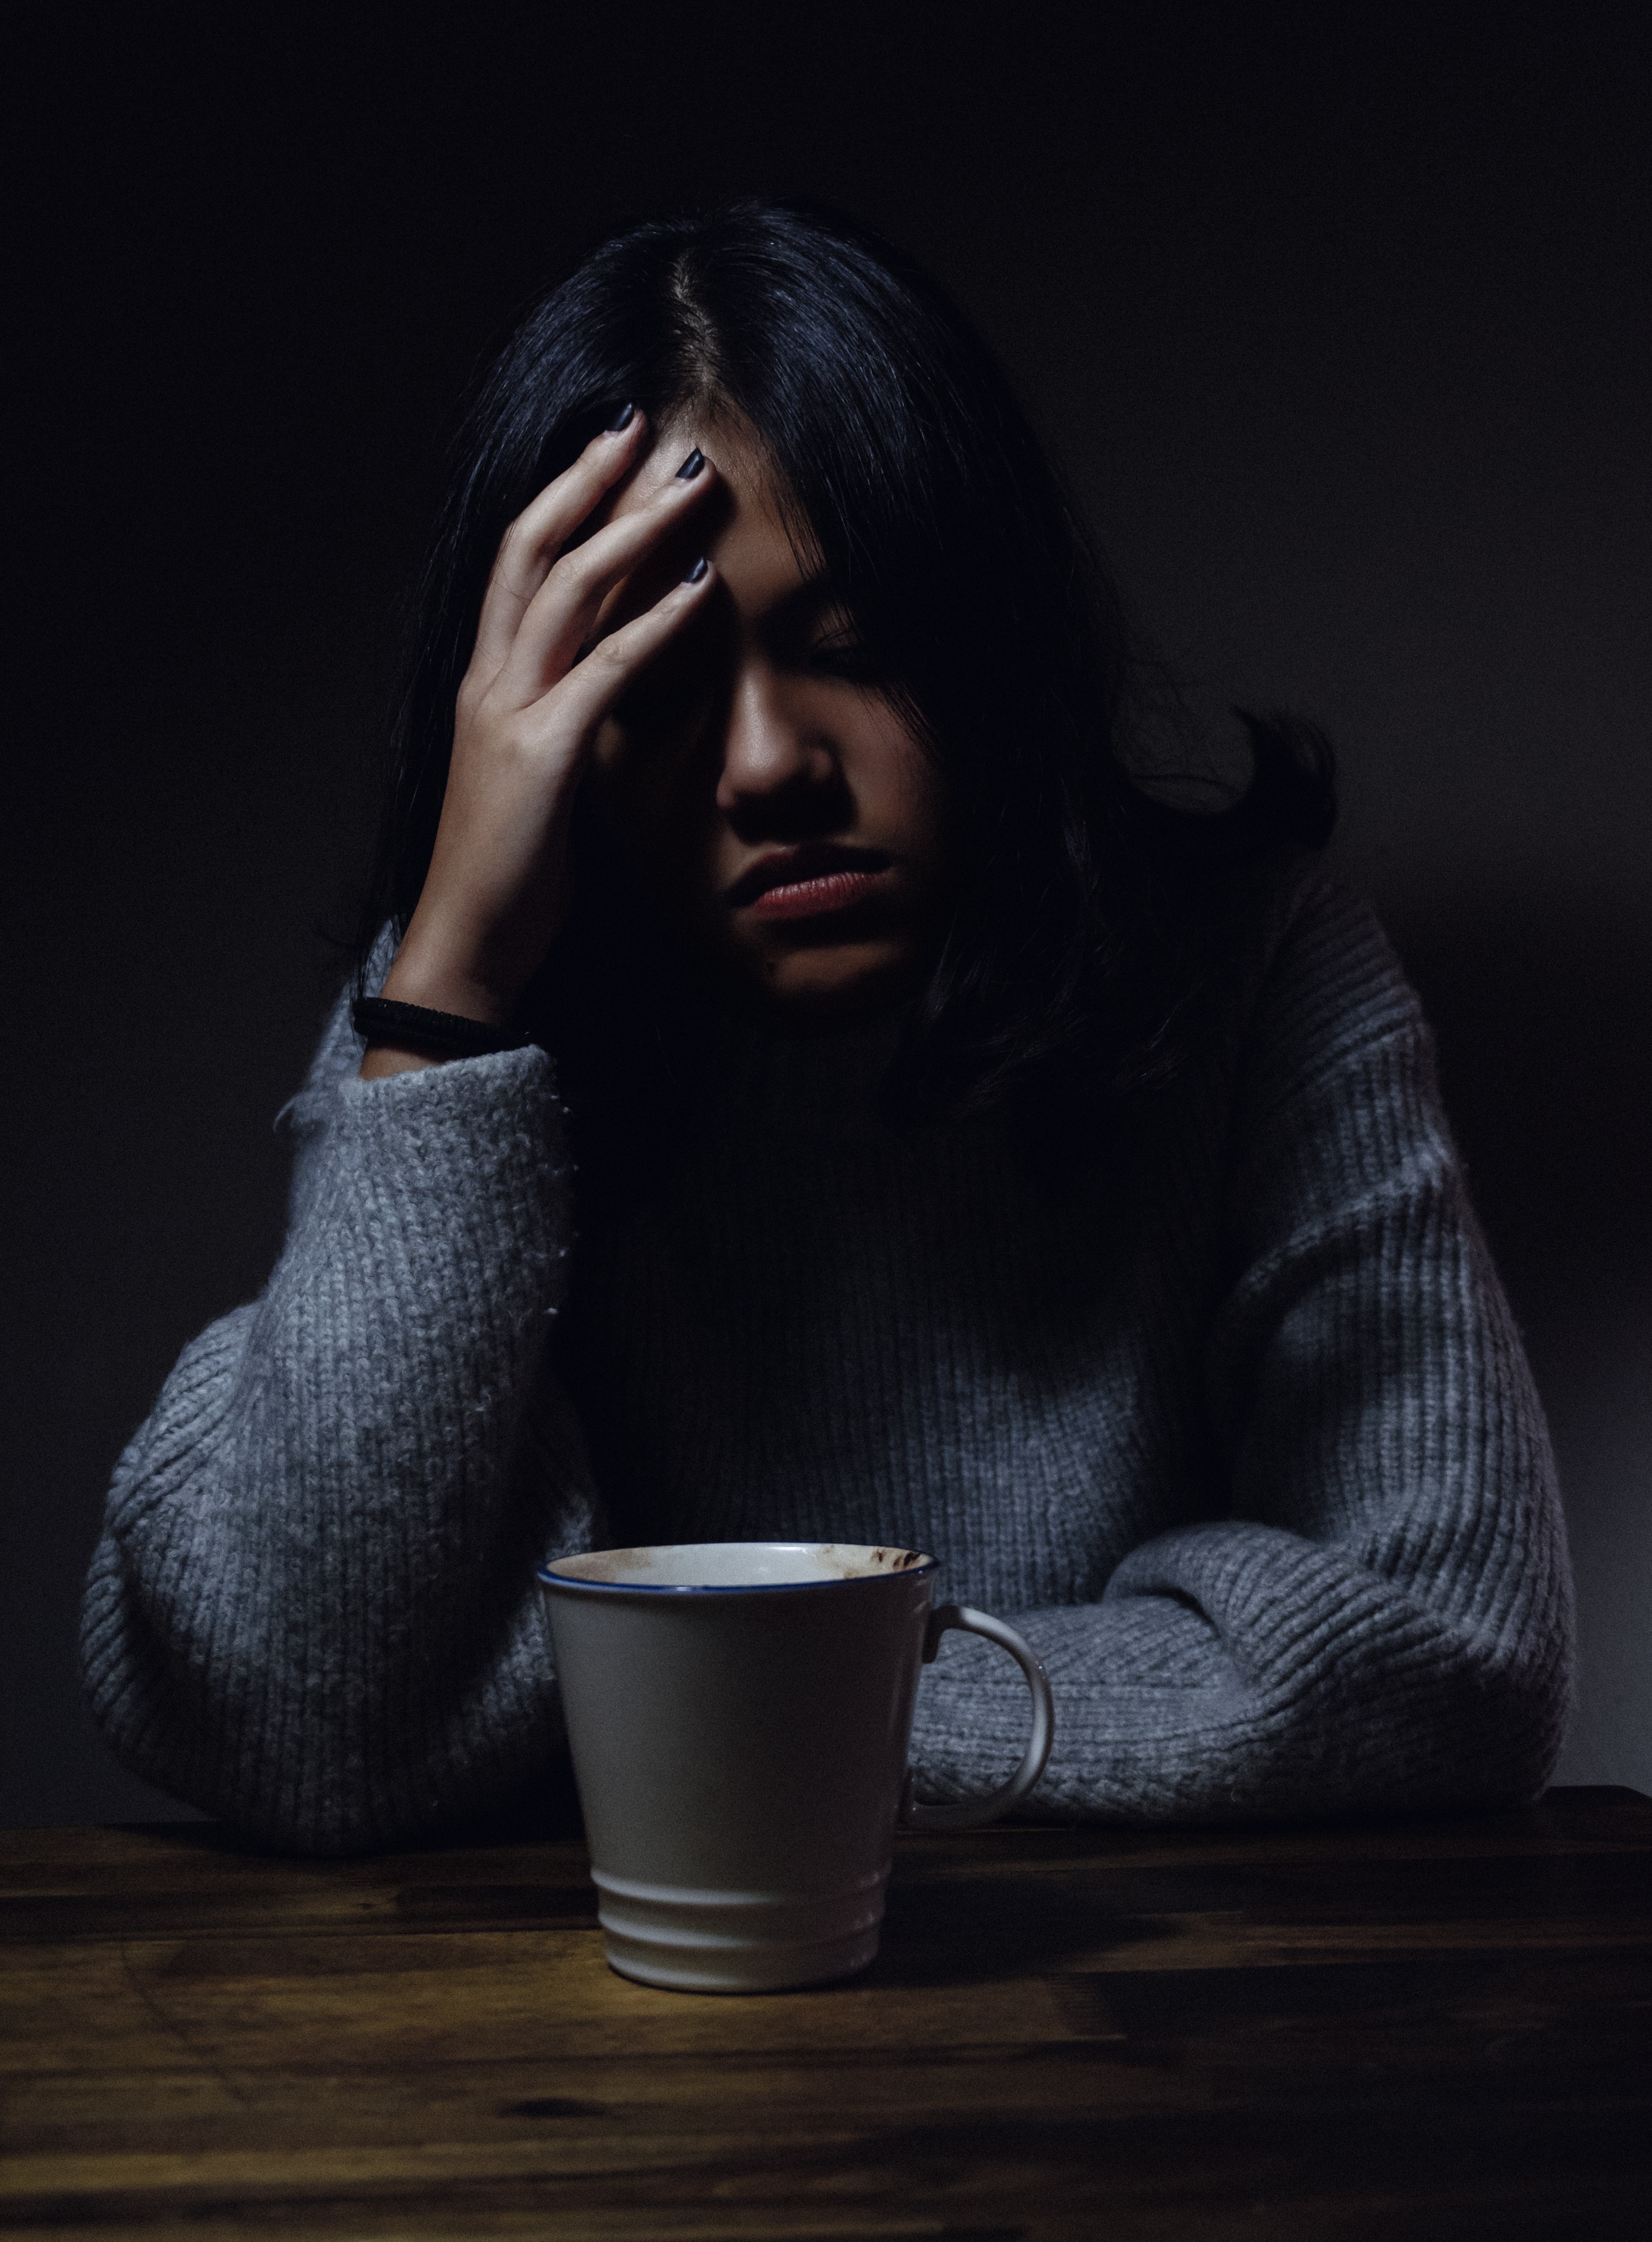 Treatment Resistant depression: a woman sitting in a darkened room with one hand on the side of her head